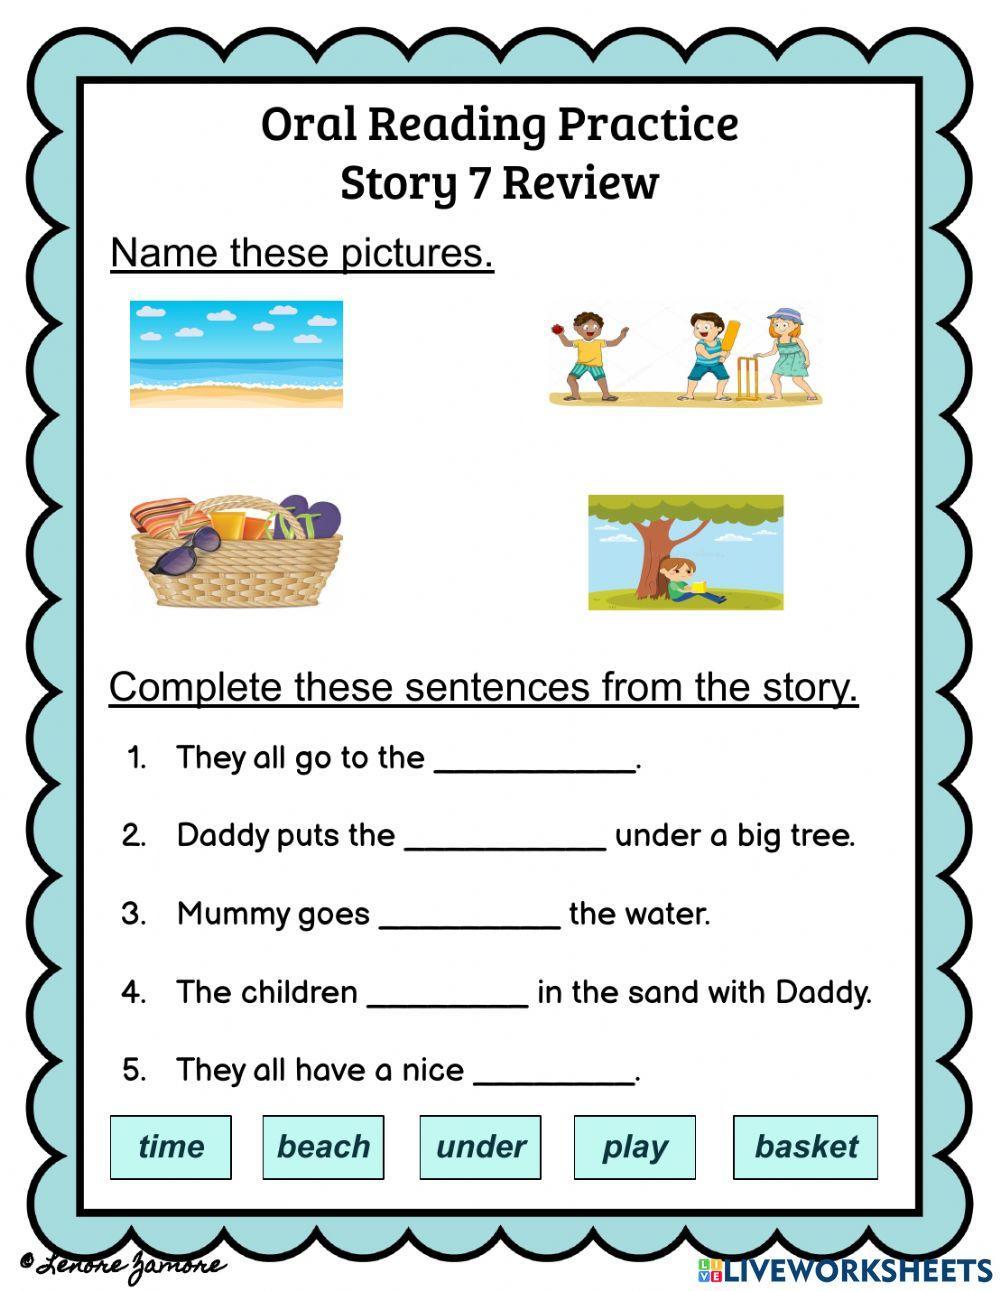 Oral Reading Practice - Story 7 Review